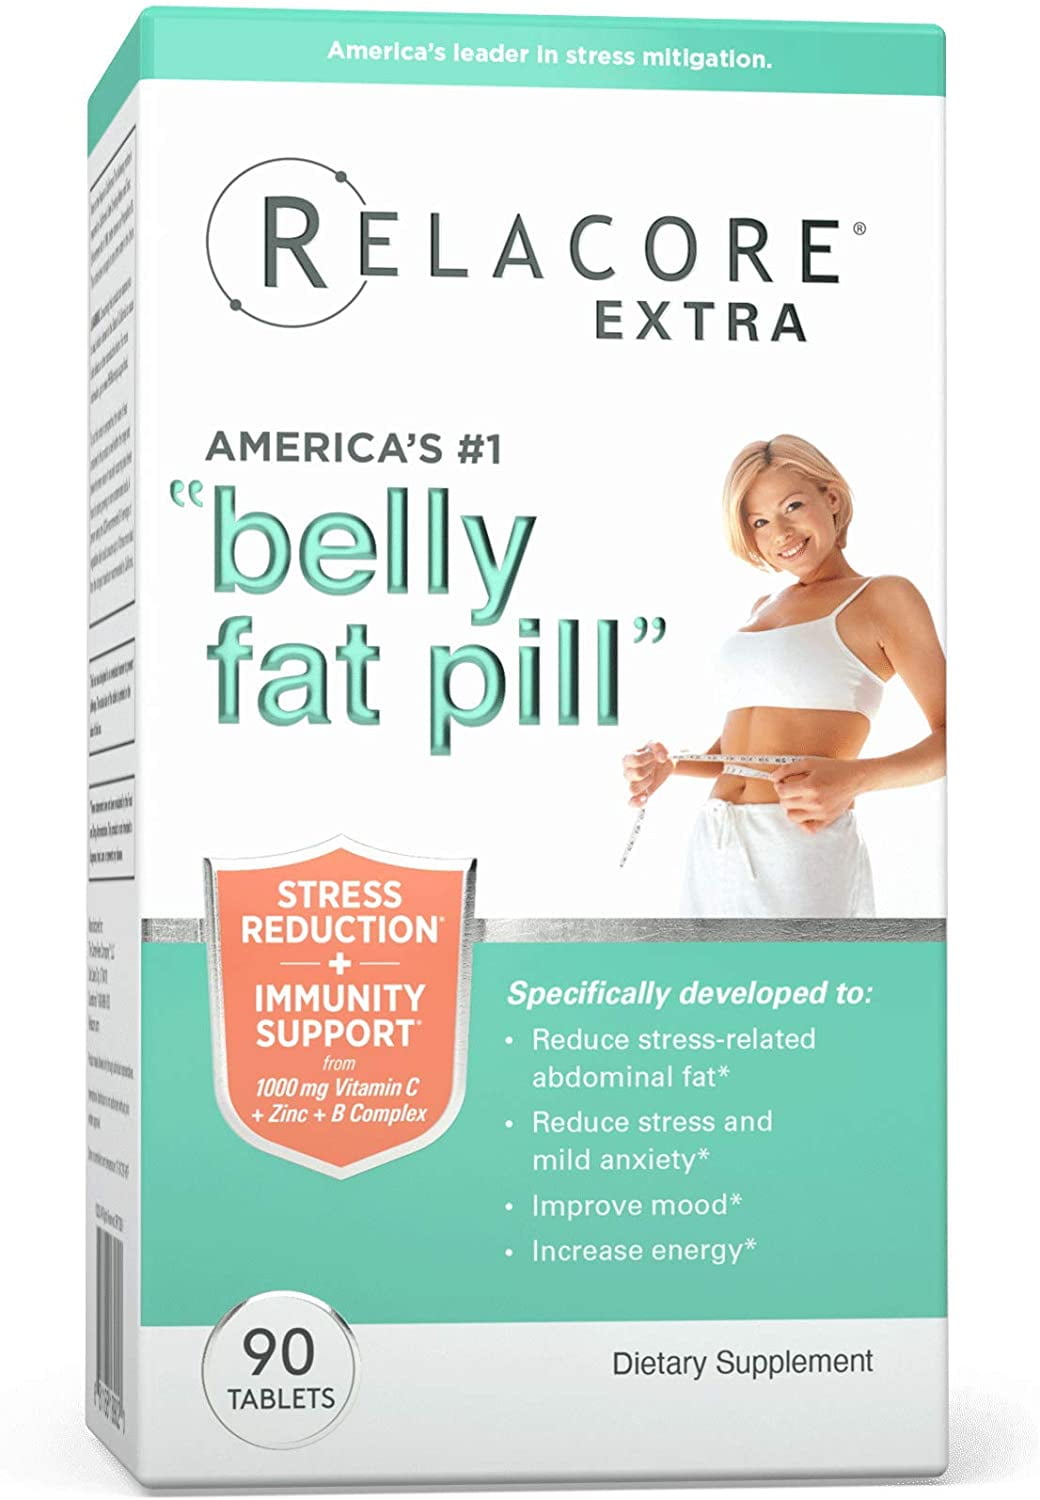 Relacore Extra Maximum Strength Stress-Mitigating Compound, 90 Count - Mild Anxiety and Stress Relief Supplements - Cortisol Manager Supplements for Women - Regulate Stress-Related Cortisol